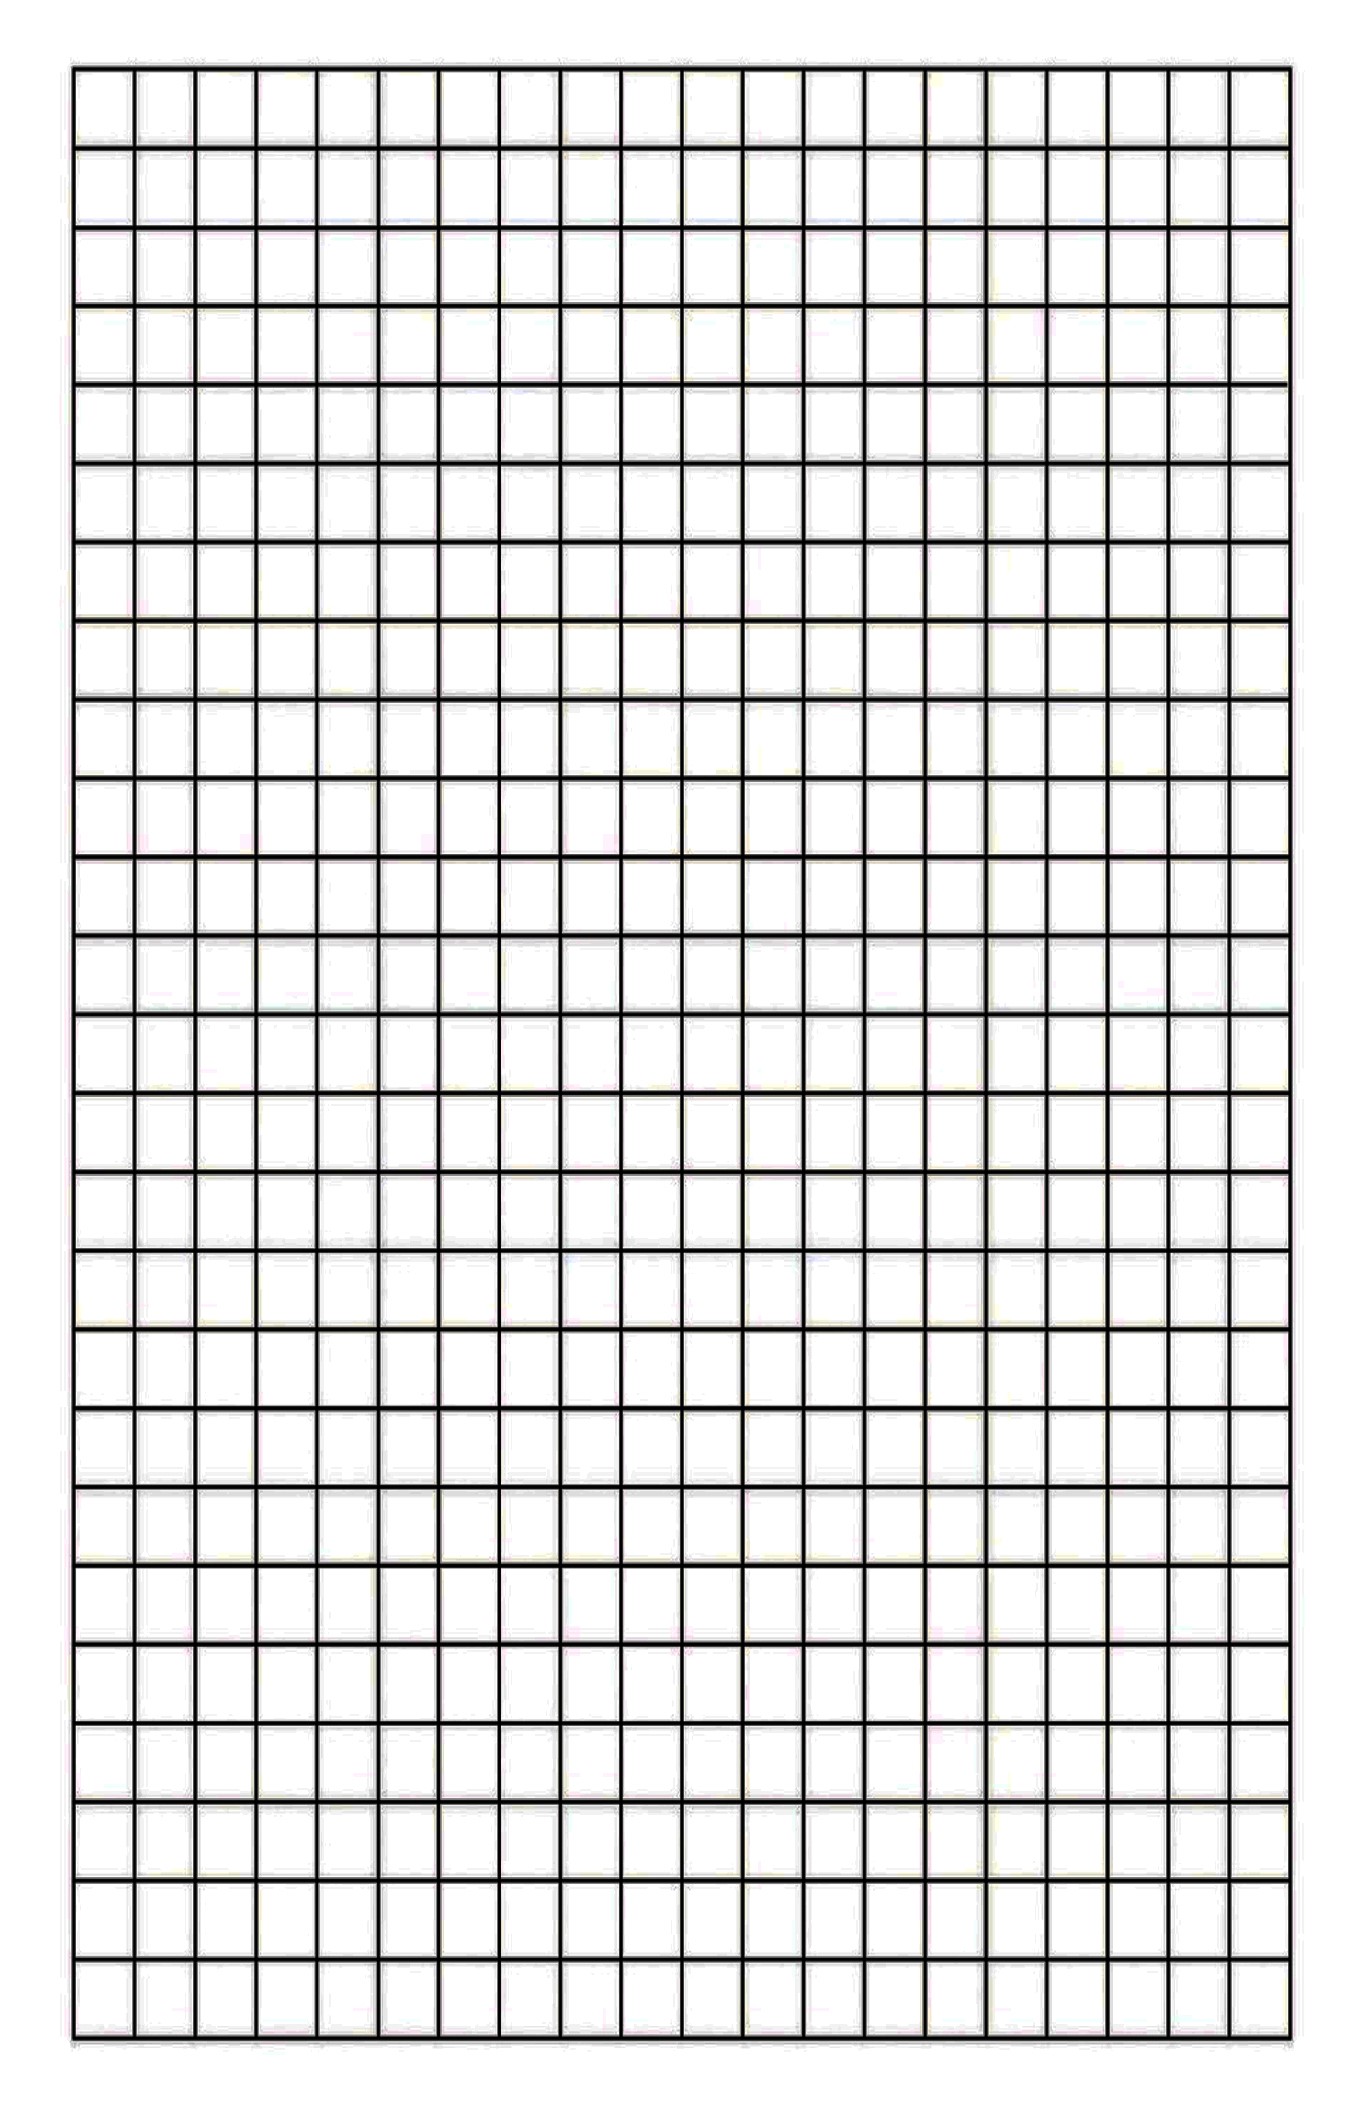 Free printable blank graph paper PDF - Printerfriendly In Blank Picture Graph Template